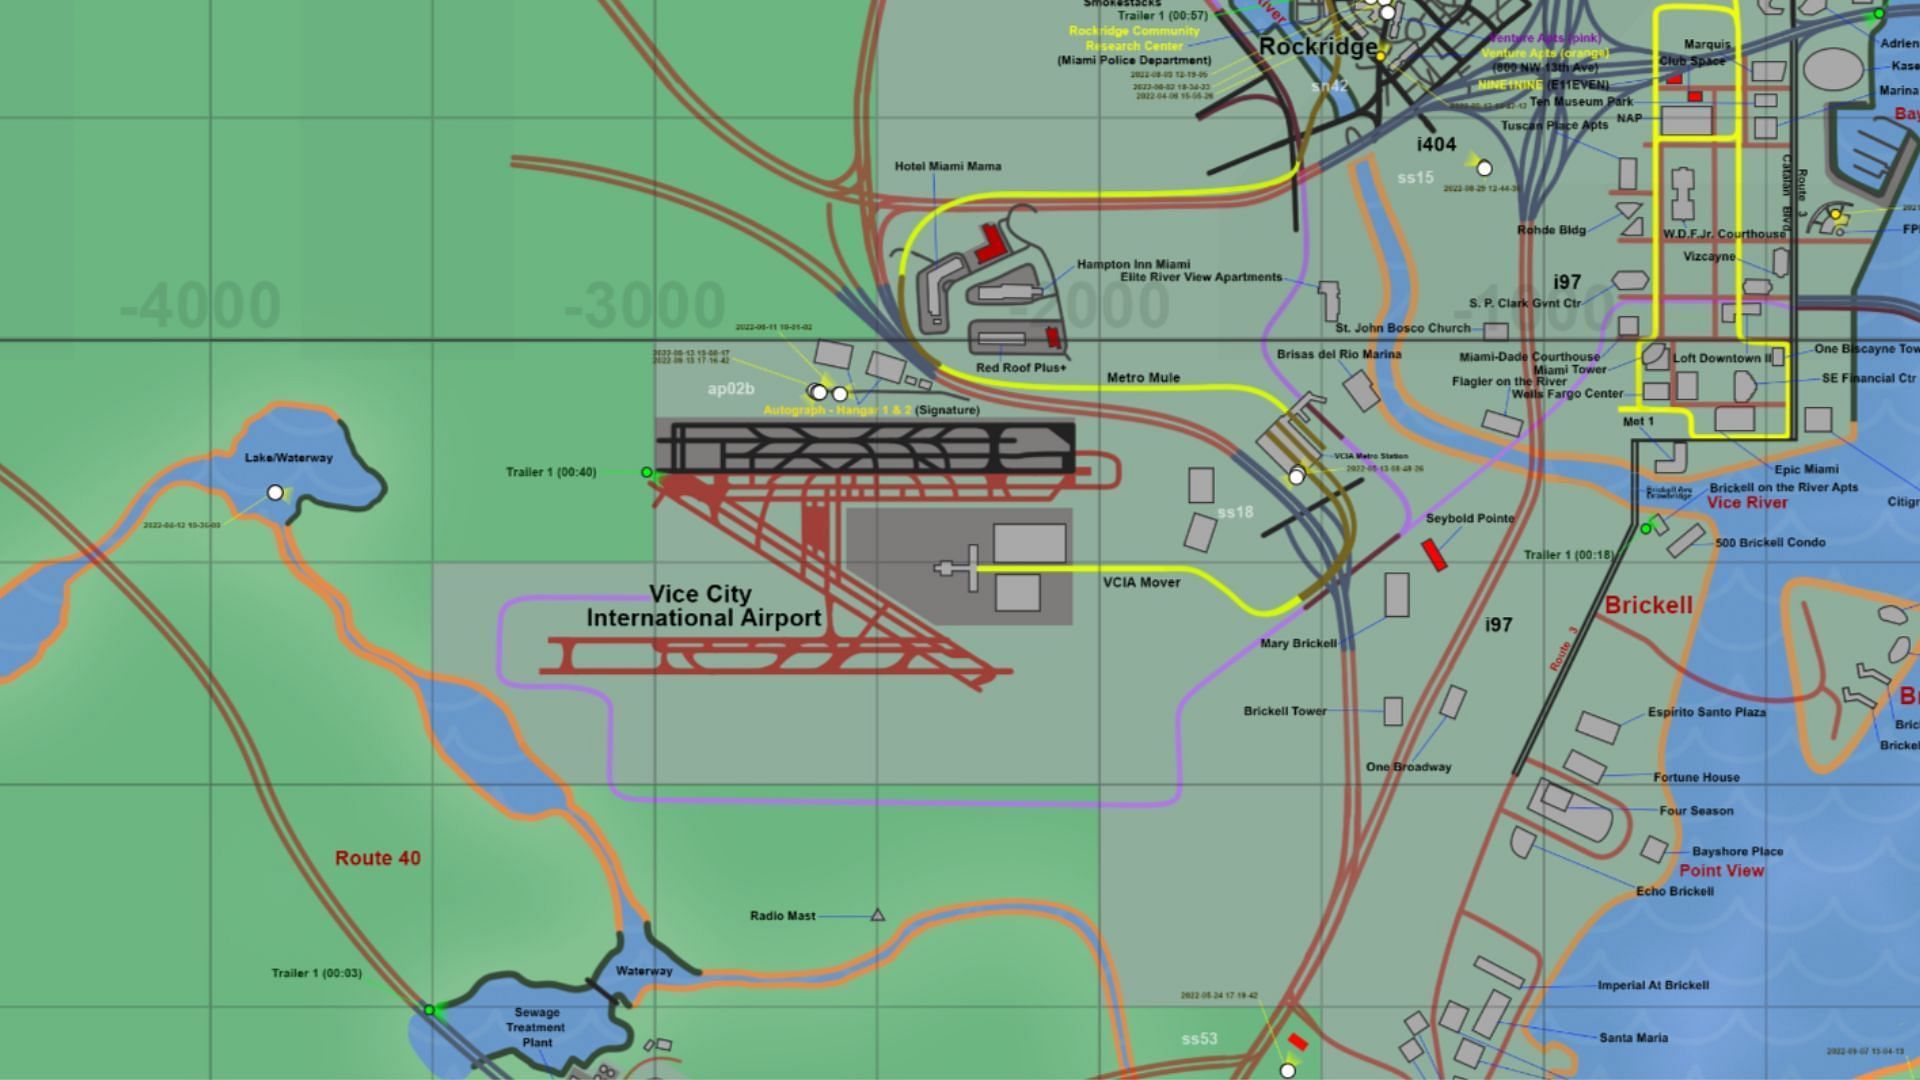 This might be what Vice City International Airport looks like (Image via VIMAP)